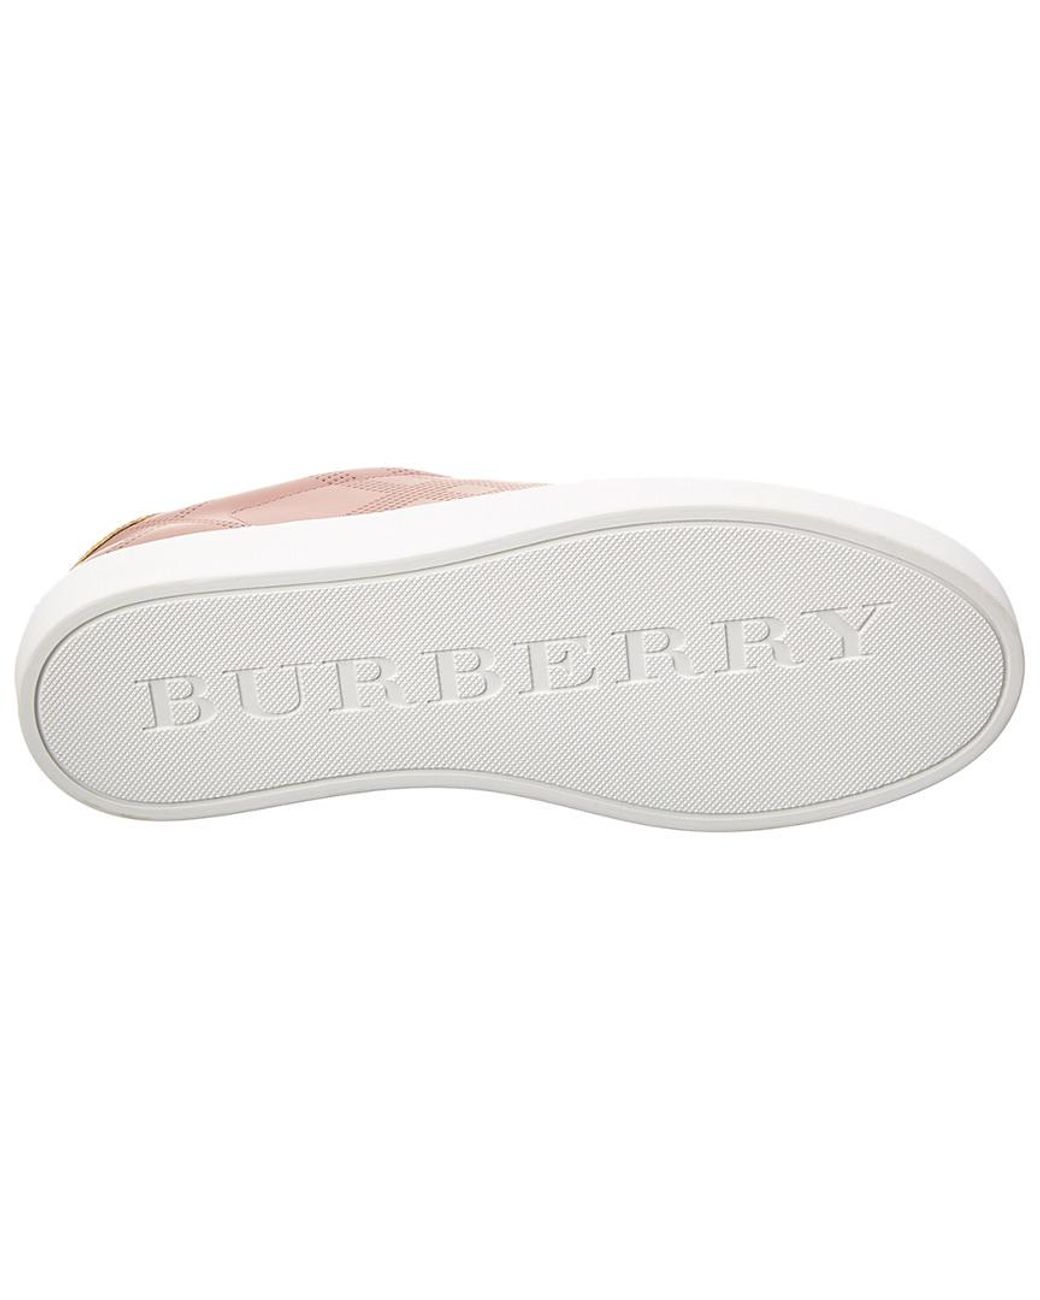 Burberry Perforated Check Leather Sneaker in | Lyst